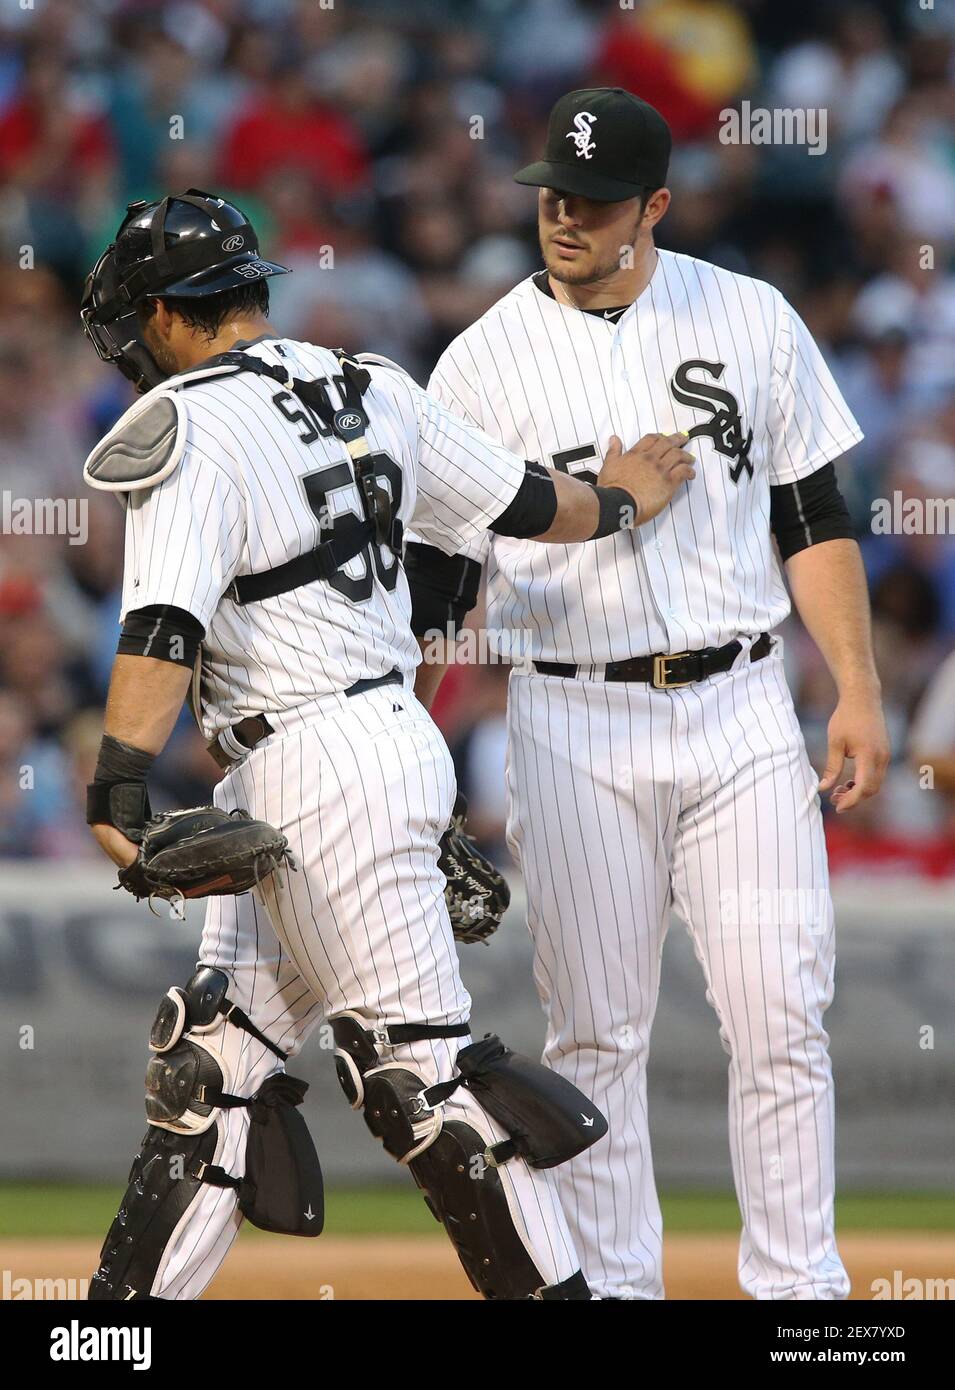 Chicago White Sox catcher Geovany Soto (58) taps pitcher Carlos Rodon on  the chest after Rodon gives up a two-run single to the St. Louis Cardinals'  Yadier Molina in the third inning